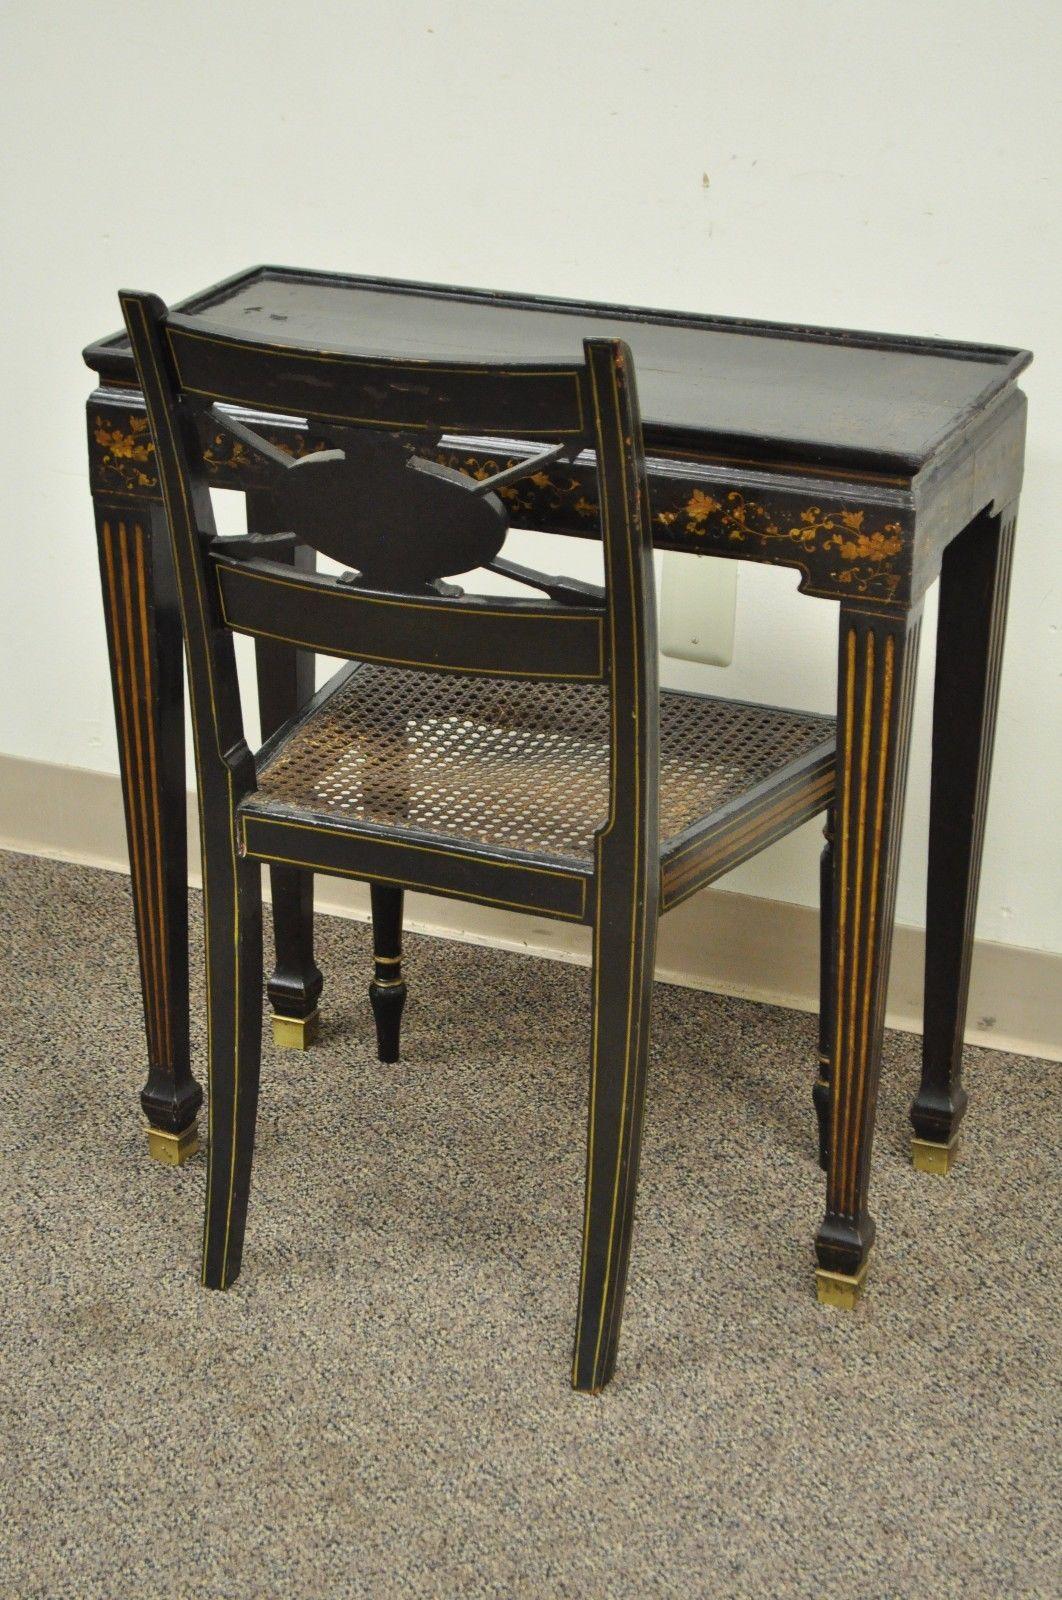 Antique neoclassical or directoire style telephone stand and accent chair. Item features caned seat side chair, black lacquered finish with gold accents, brass capped feet on table, floral decorated table top and skirt, carved arrow back with